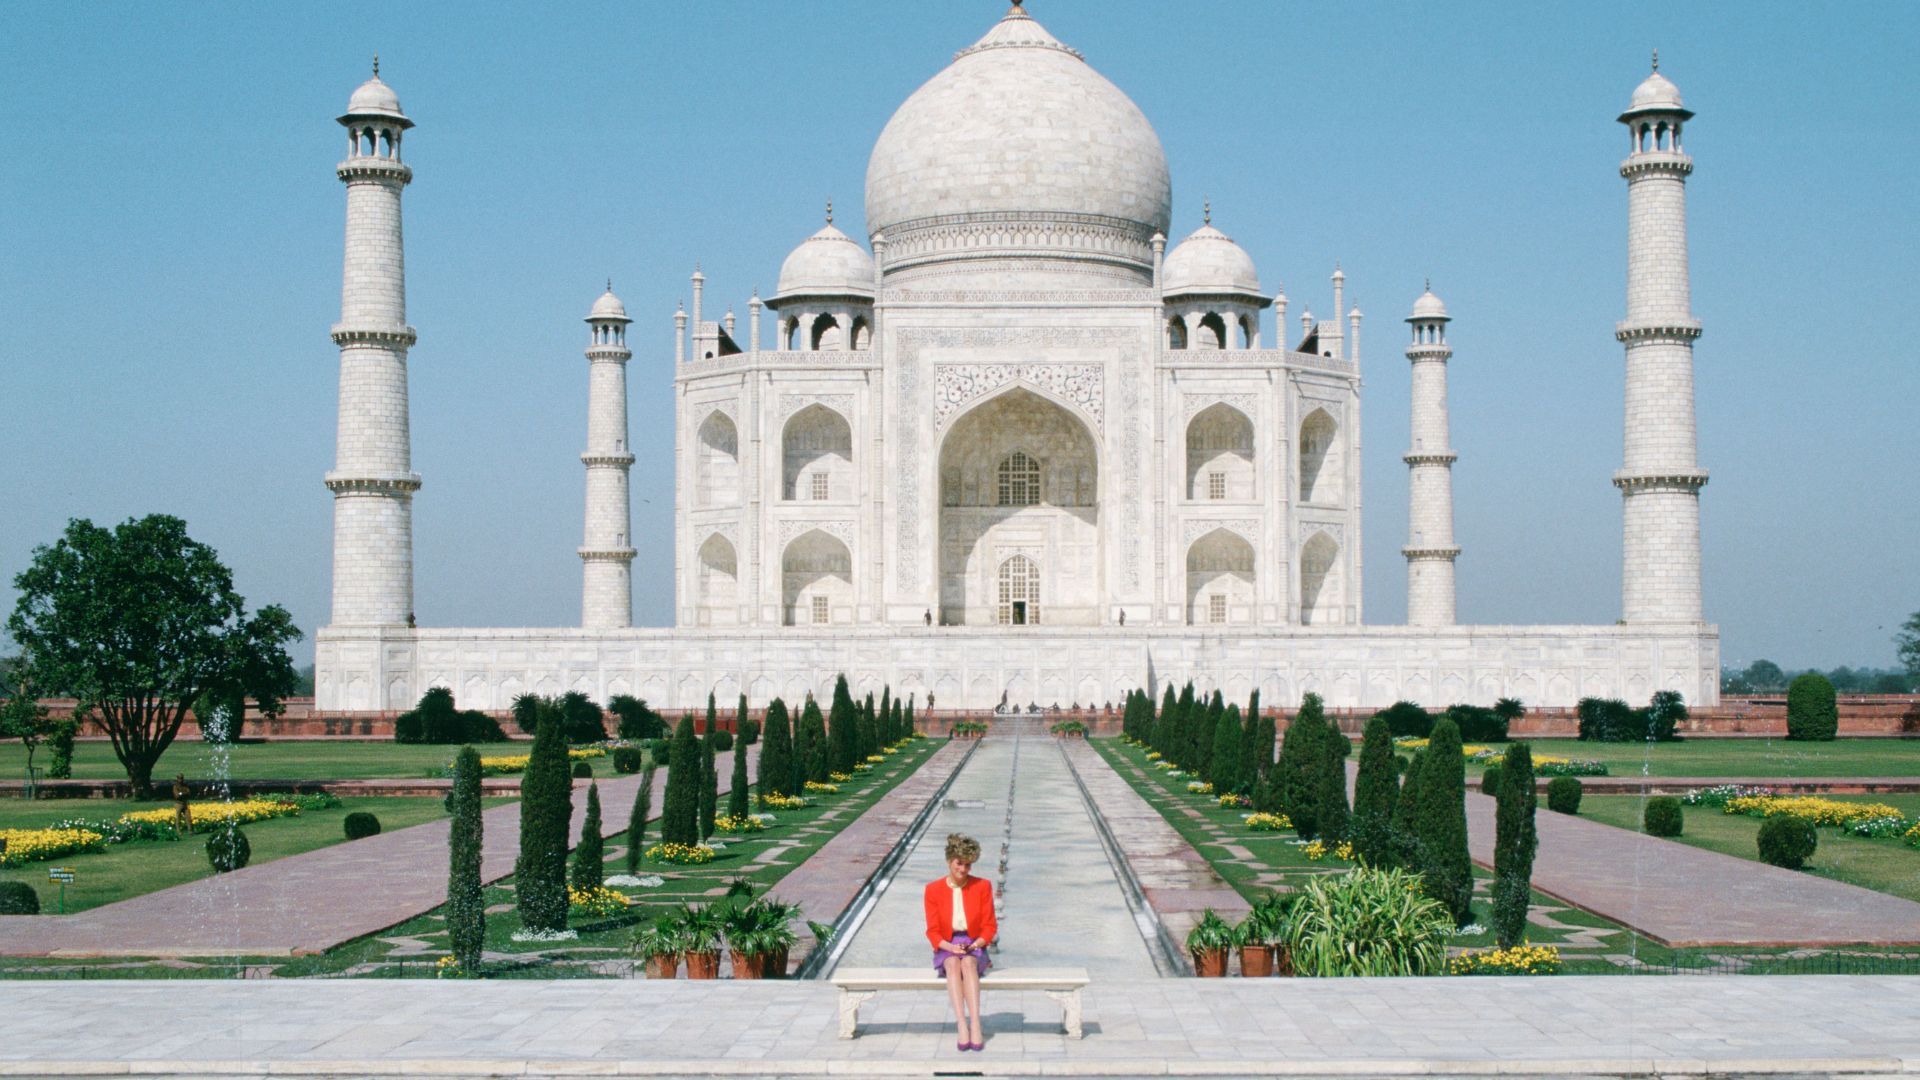 <p>                     While marriage breakdown rumours were swirling at the time, Princess Diana said her experience of the monumental Taj Mahal was "fascinating and very healing". The resulting image of Diana sitting alone in front of the epic ivory-white marble mausoleum became one of the most memorable photographs of the Princess's seven-day trip to India if not one of the most famous images of all time. Diana spent over an hour contemplating the Taj’s beauty before writing, "A beautiful monument" in the visitors' book. Though she visited India multiple times, her first visit in 1992 when she also visited Delhi, Hyderabad, and Kolkata is perhaps her most known.                   </p>